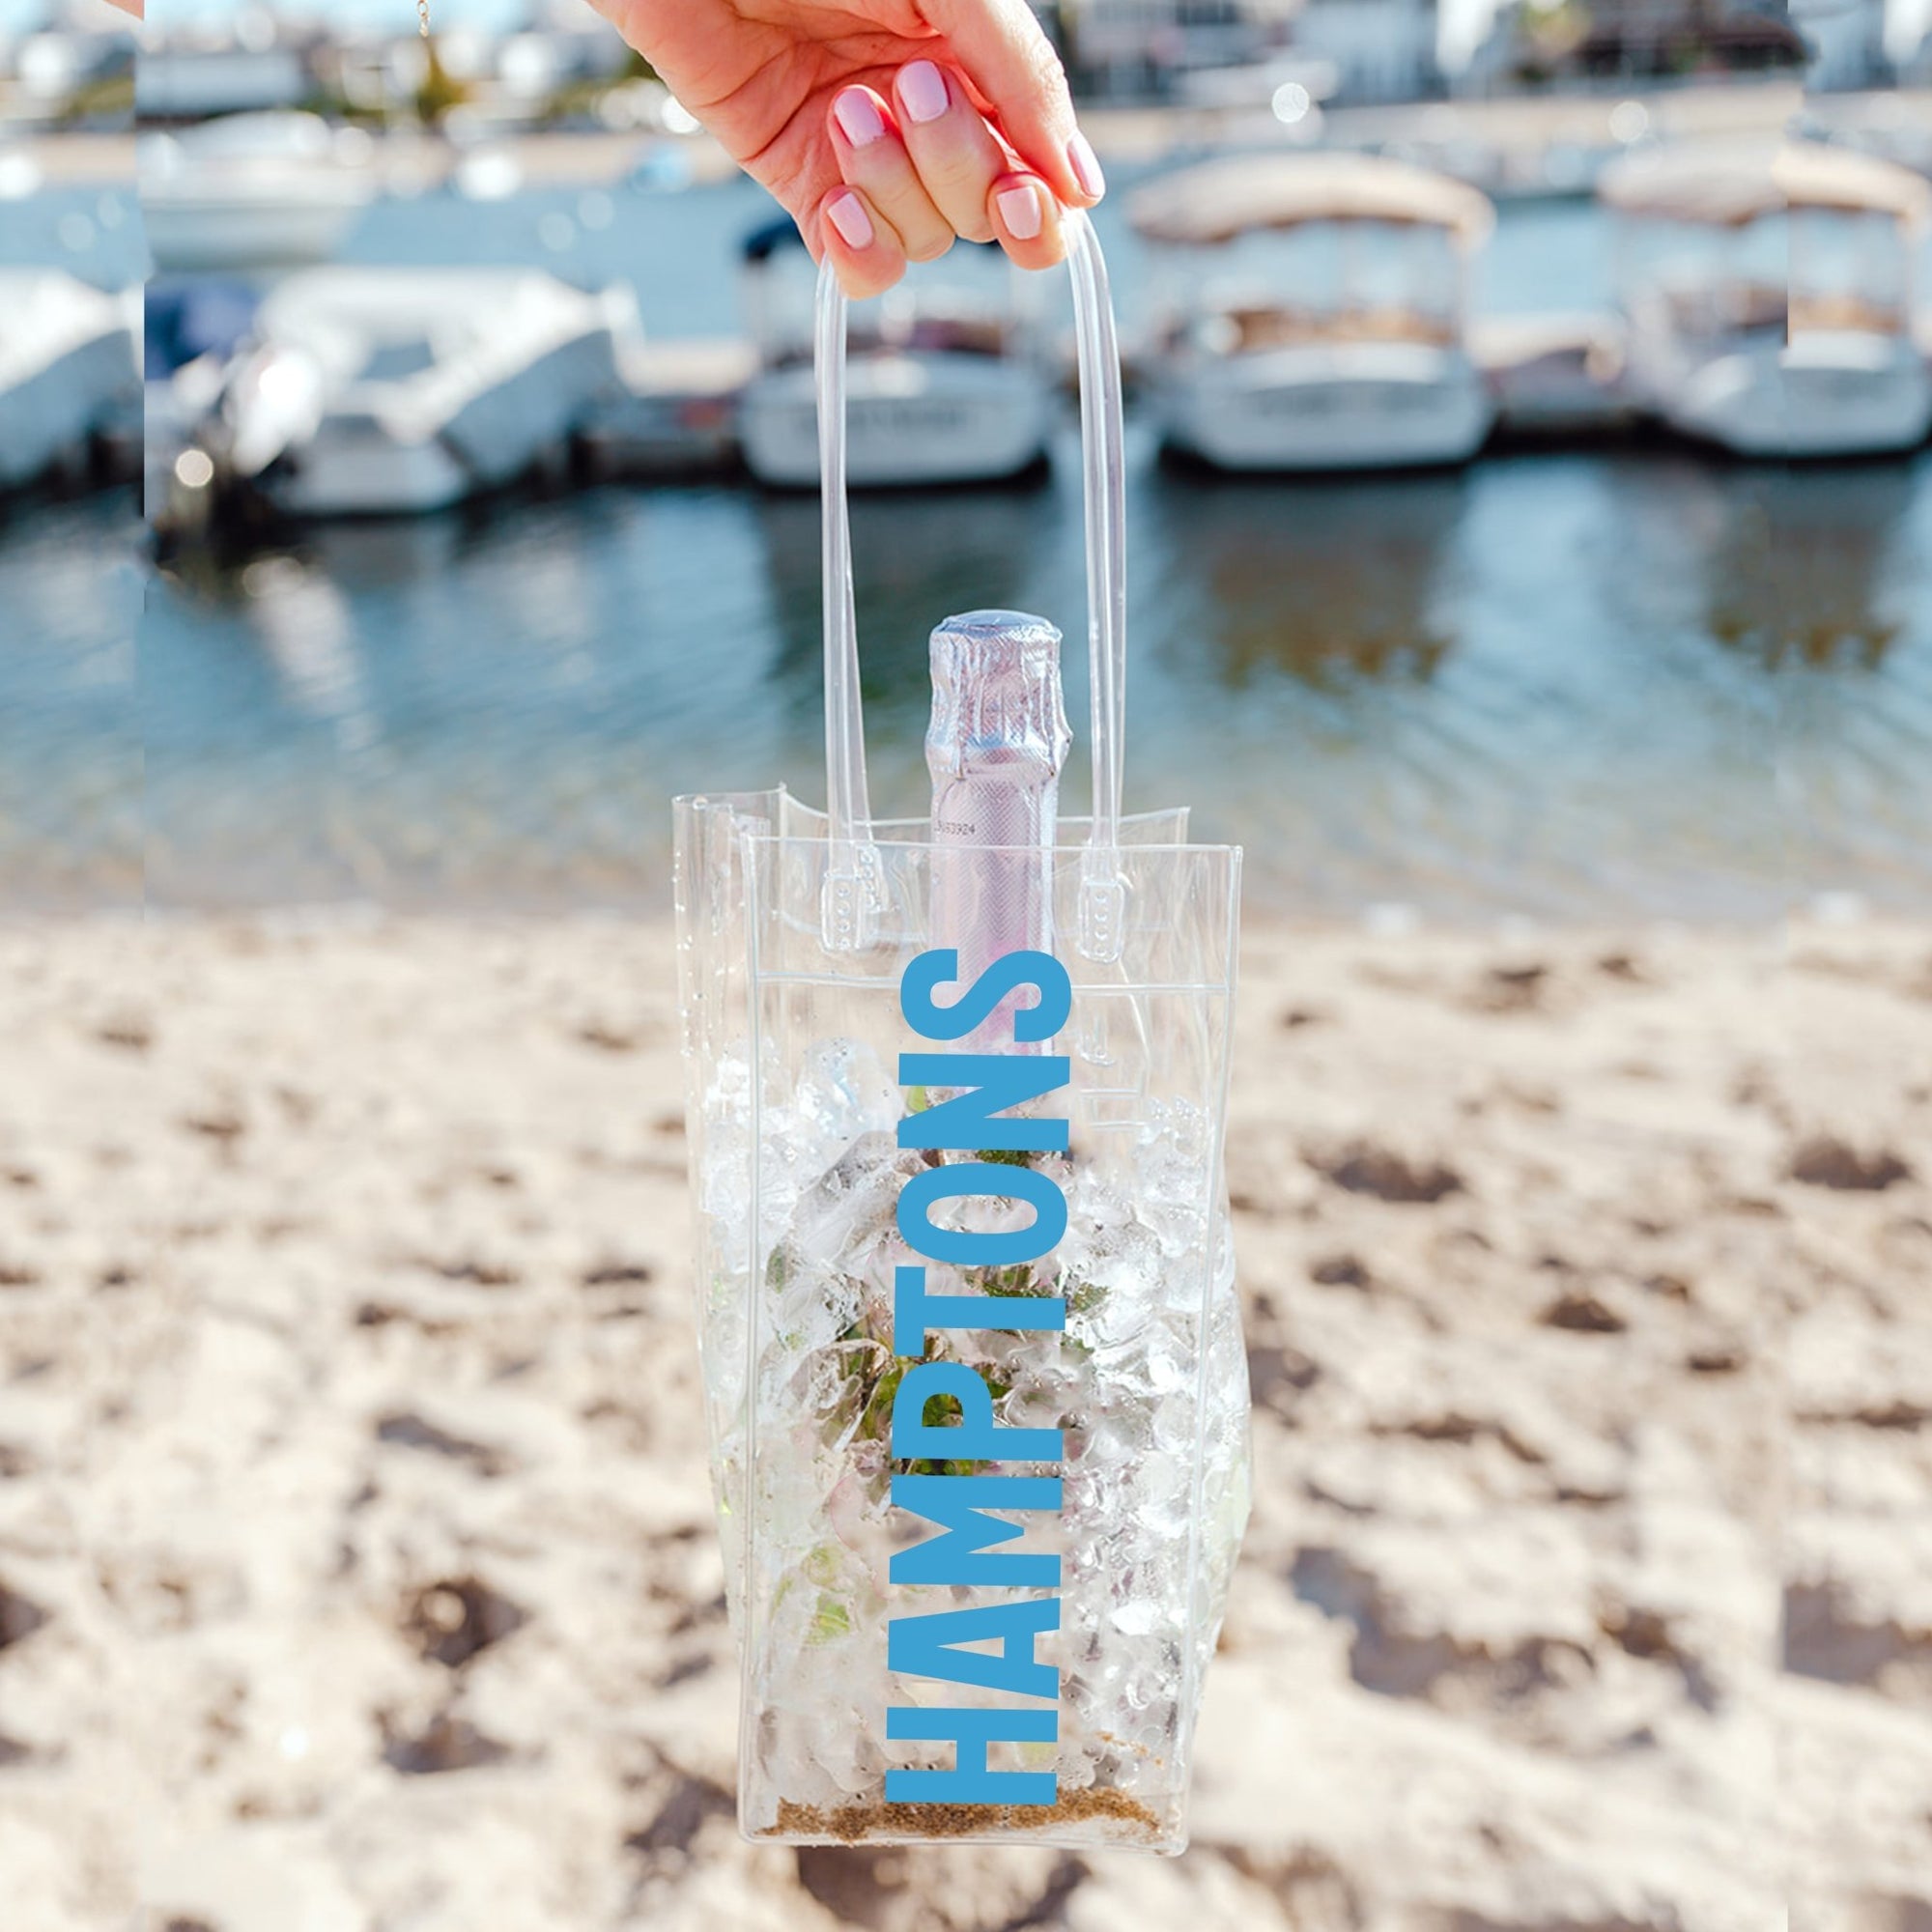 A clear wine bag that says "Hamptons" in blue